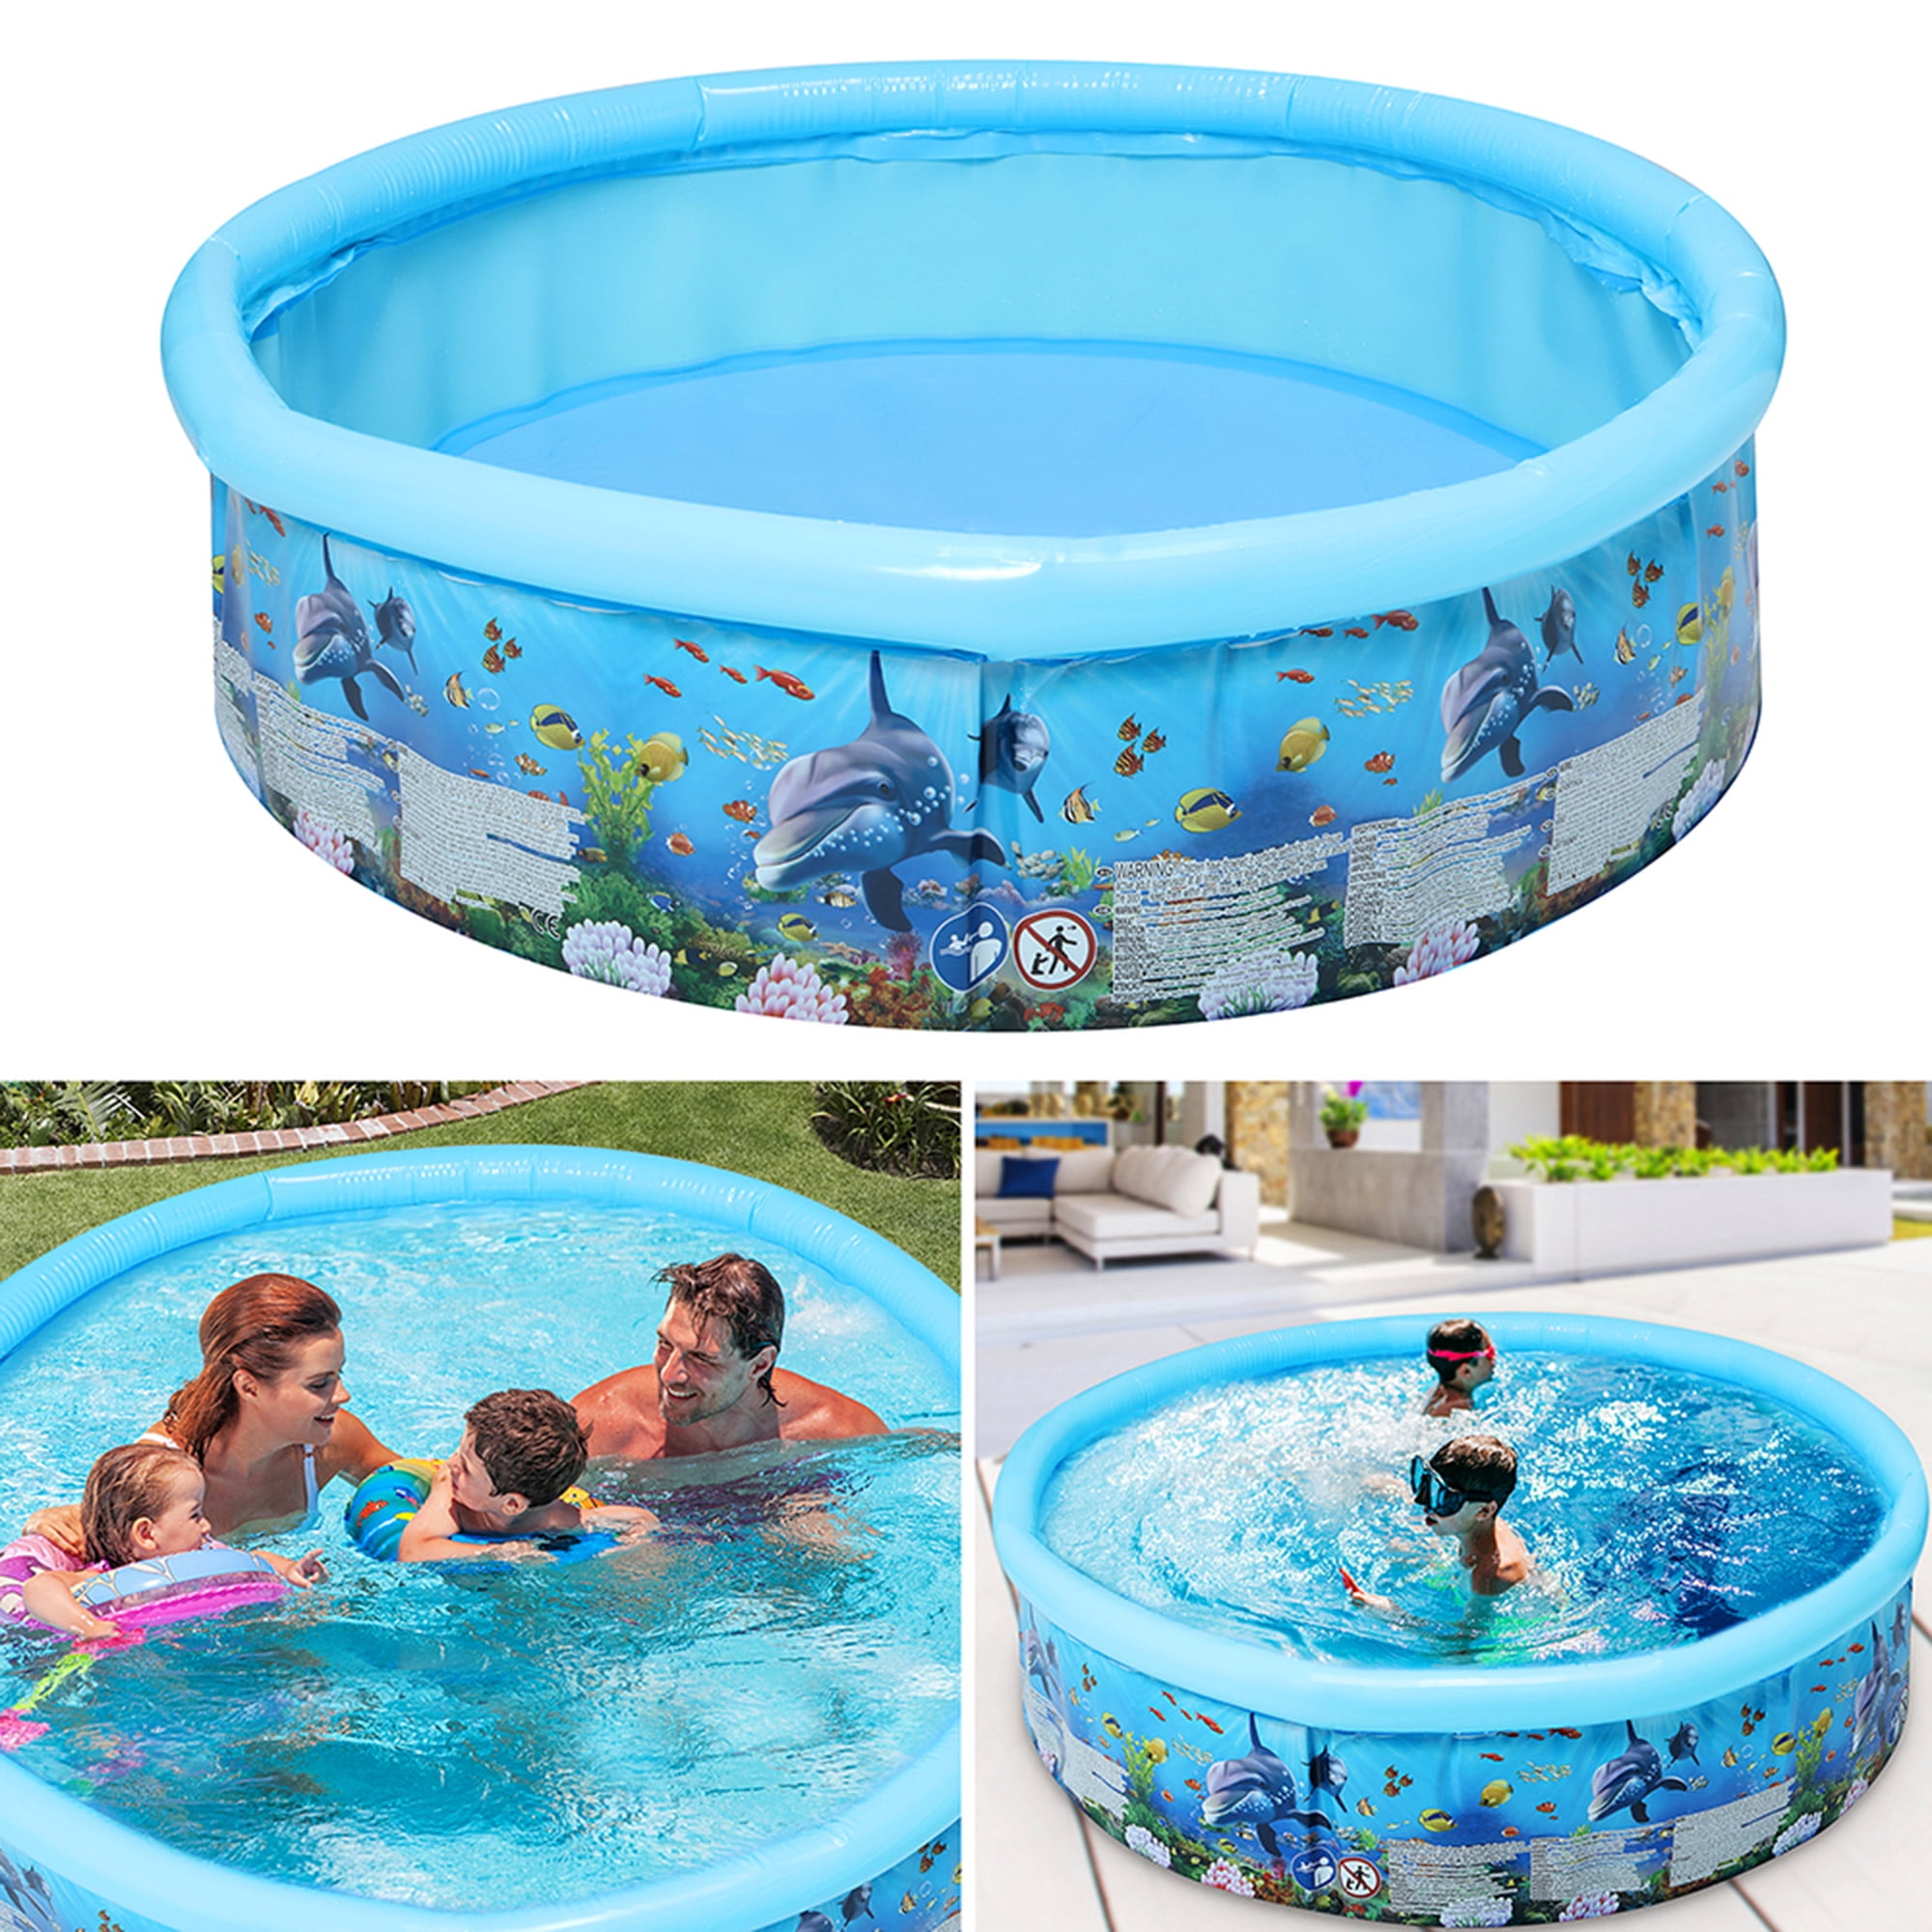 Kiddie Pool 5ft x 12in Water Pool in Summer Whole Family Pool: Children’s Pool Inflatable Outdoor//Indoor Pool — Blue Coloured Sw Pit Ball Pool of 150cm x 30cm Kiddie Pool Baby Pool Kid’s Pool Round Inflatable Pool Puppy Pool Babies Pool Pets Pool